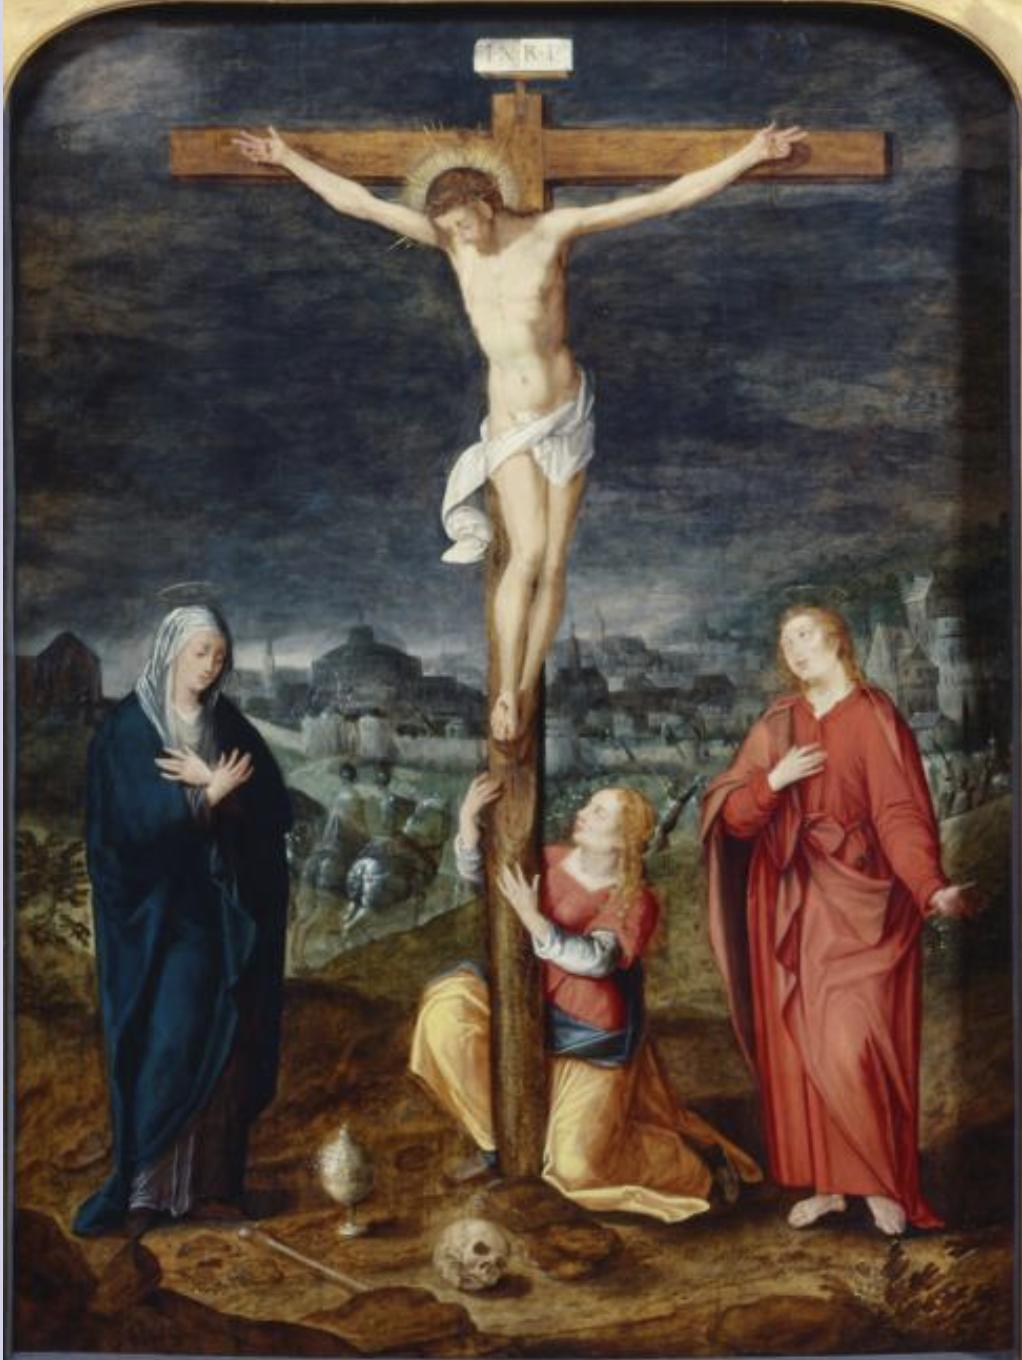 16th century crucifixion scene - Flemish old master - Antwerp, Bruges - Black Figurative Painting by Frans Pourbus the Elder